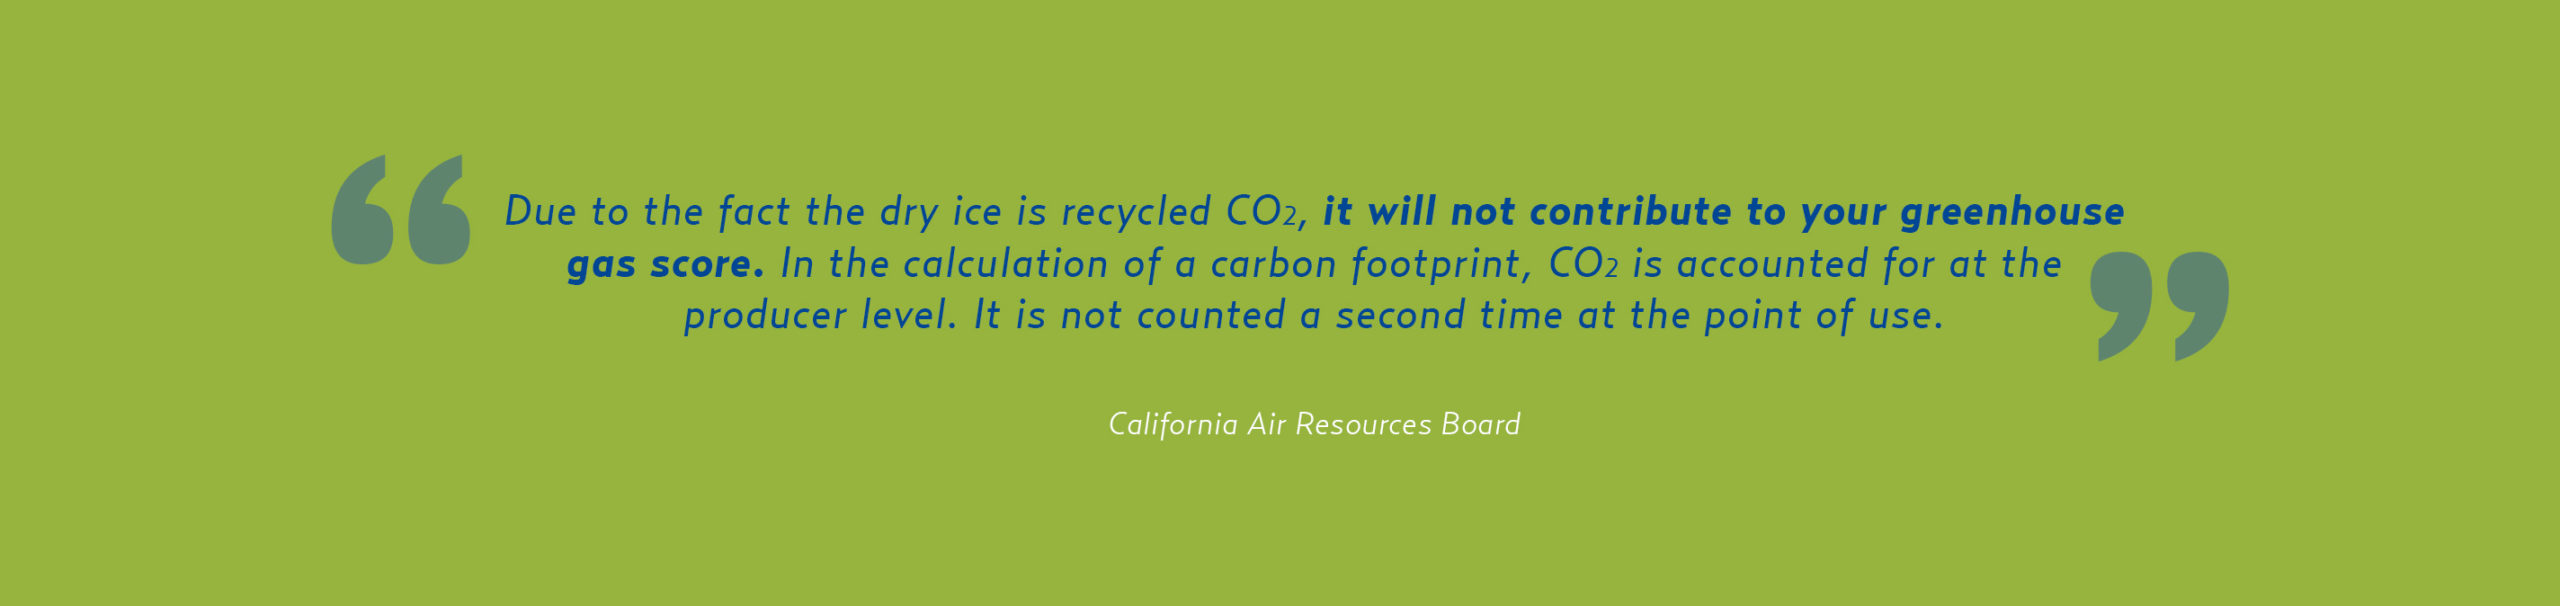 Environmental Sustainability of Dry Ice Quote - California Air Resources Board